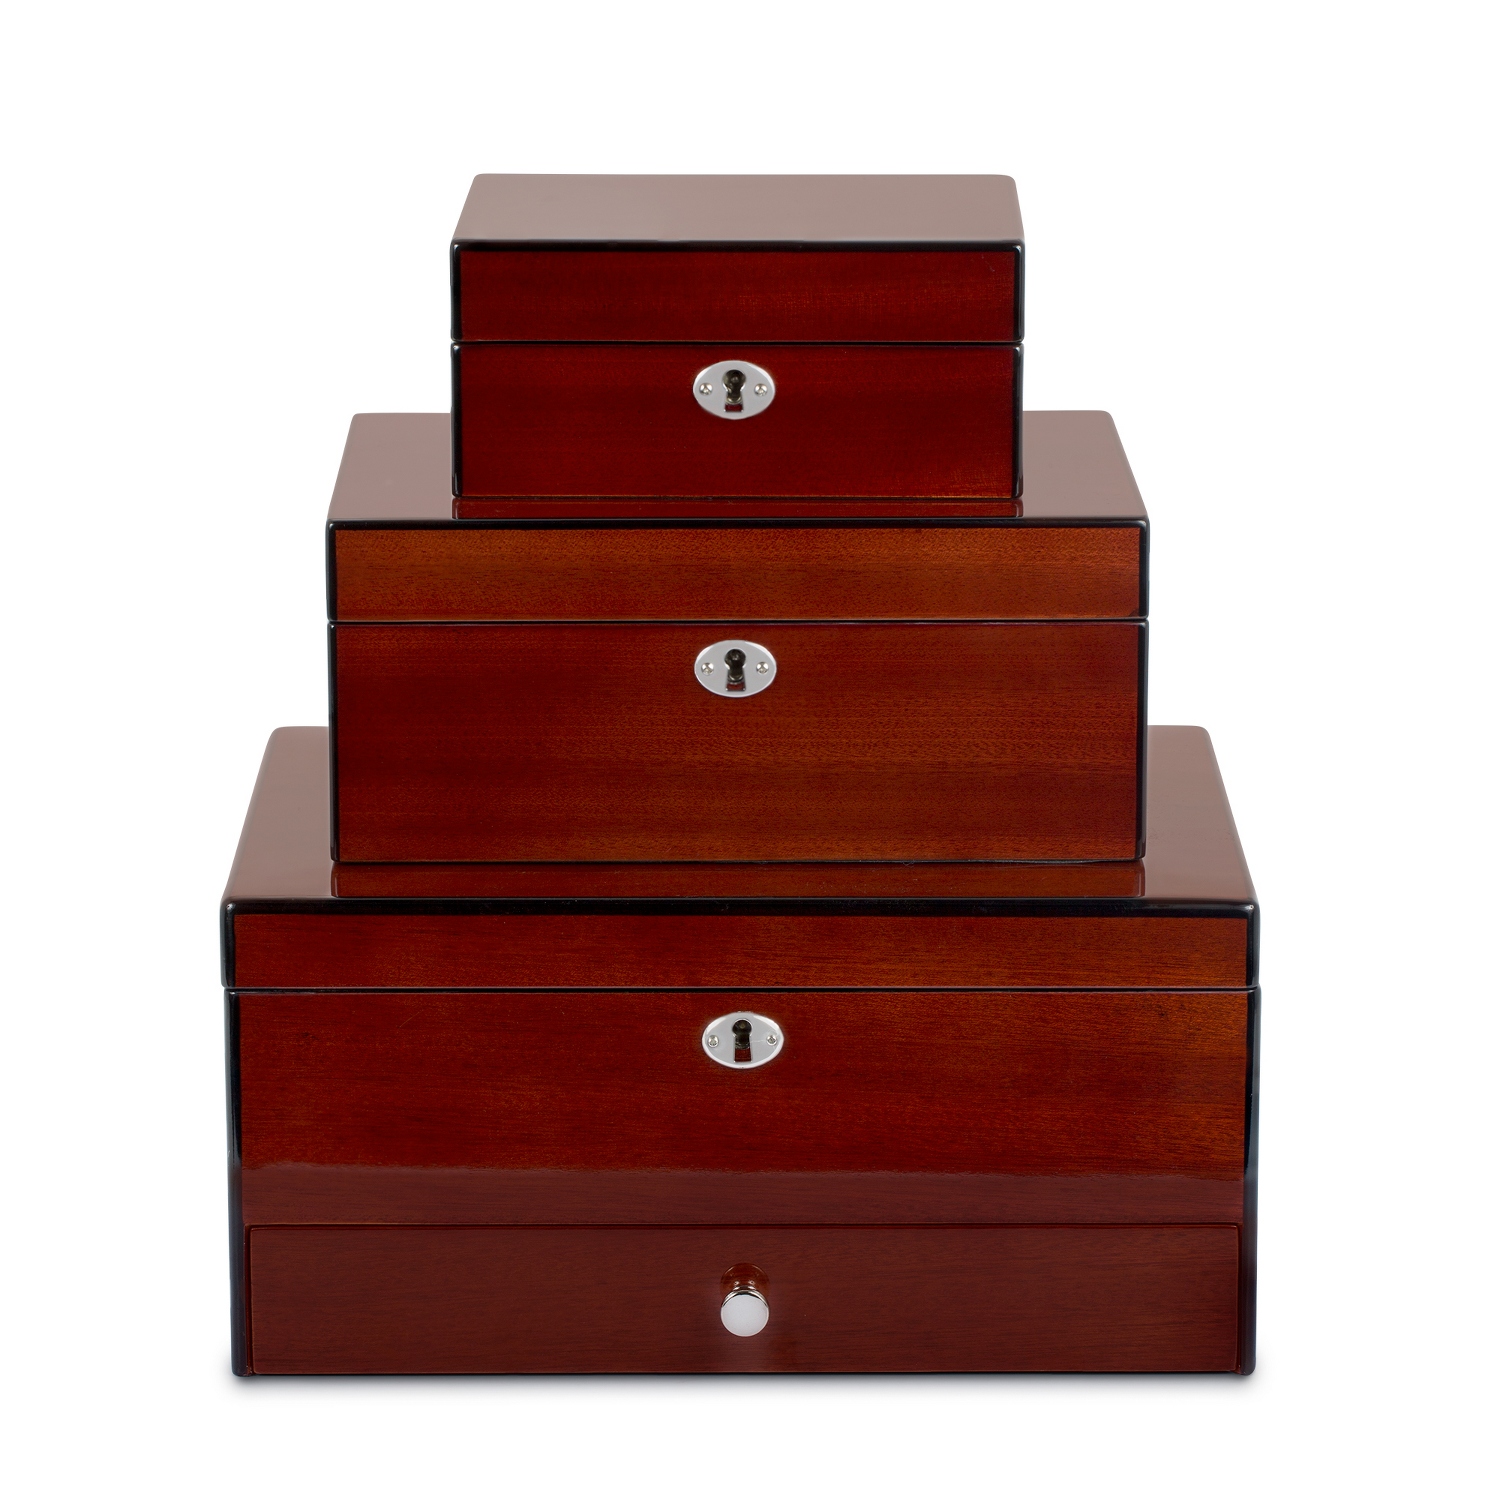 Piano Wood Jewelry Boxes